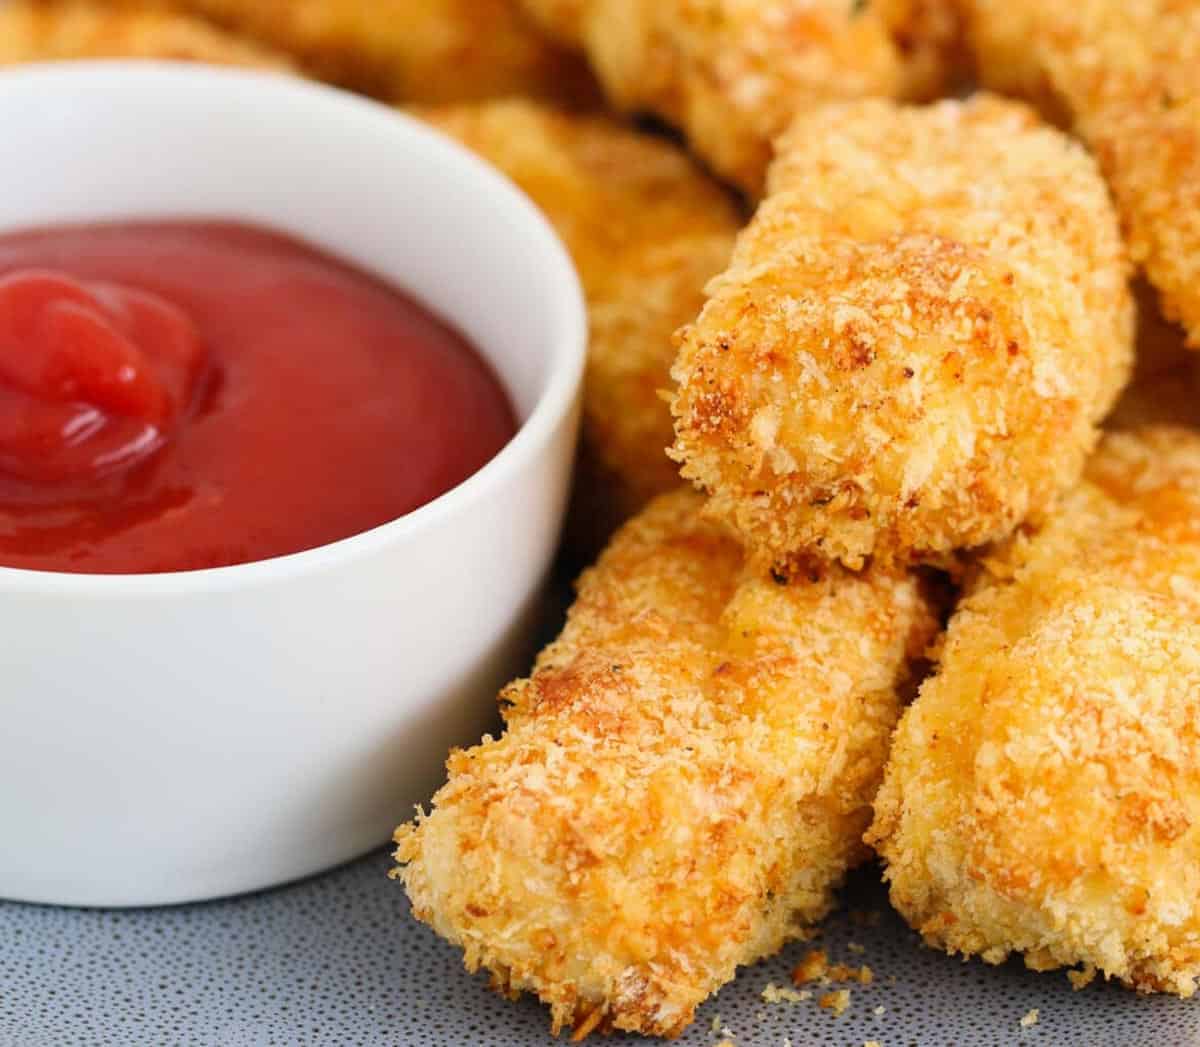 A stack of golden crunchy rectangular nuggets with red tomato sauce in a white bowl.